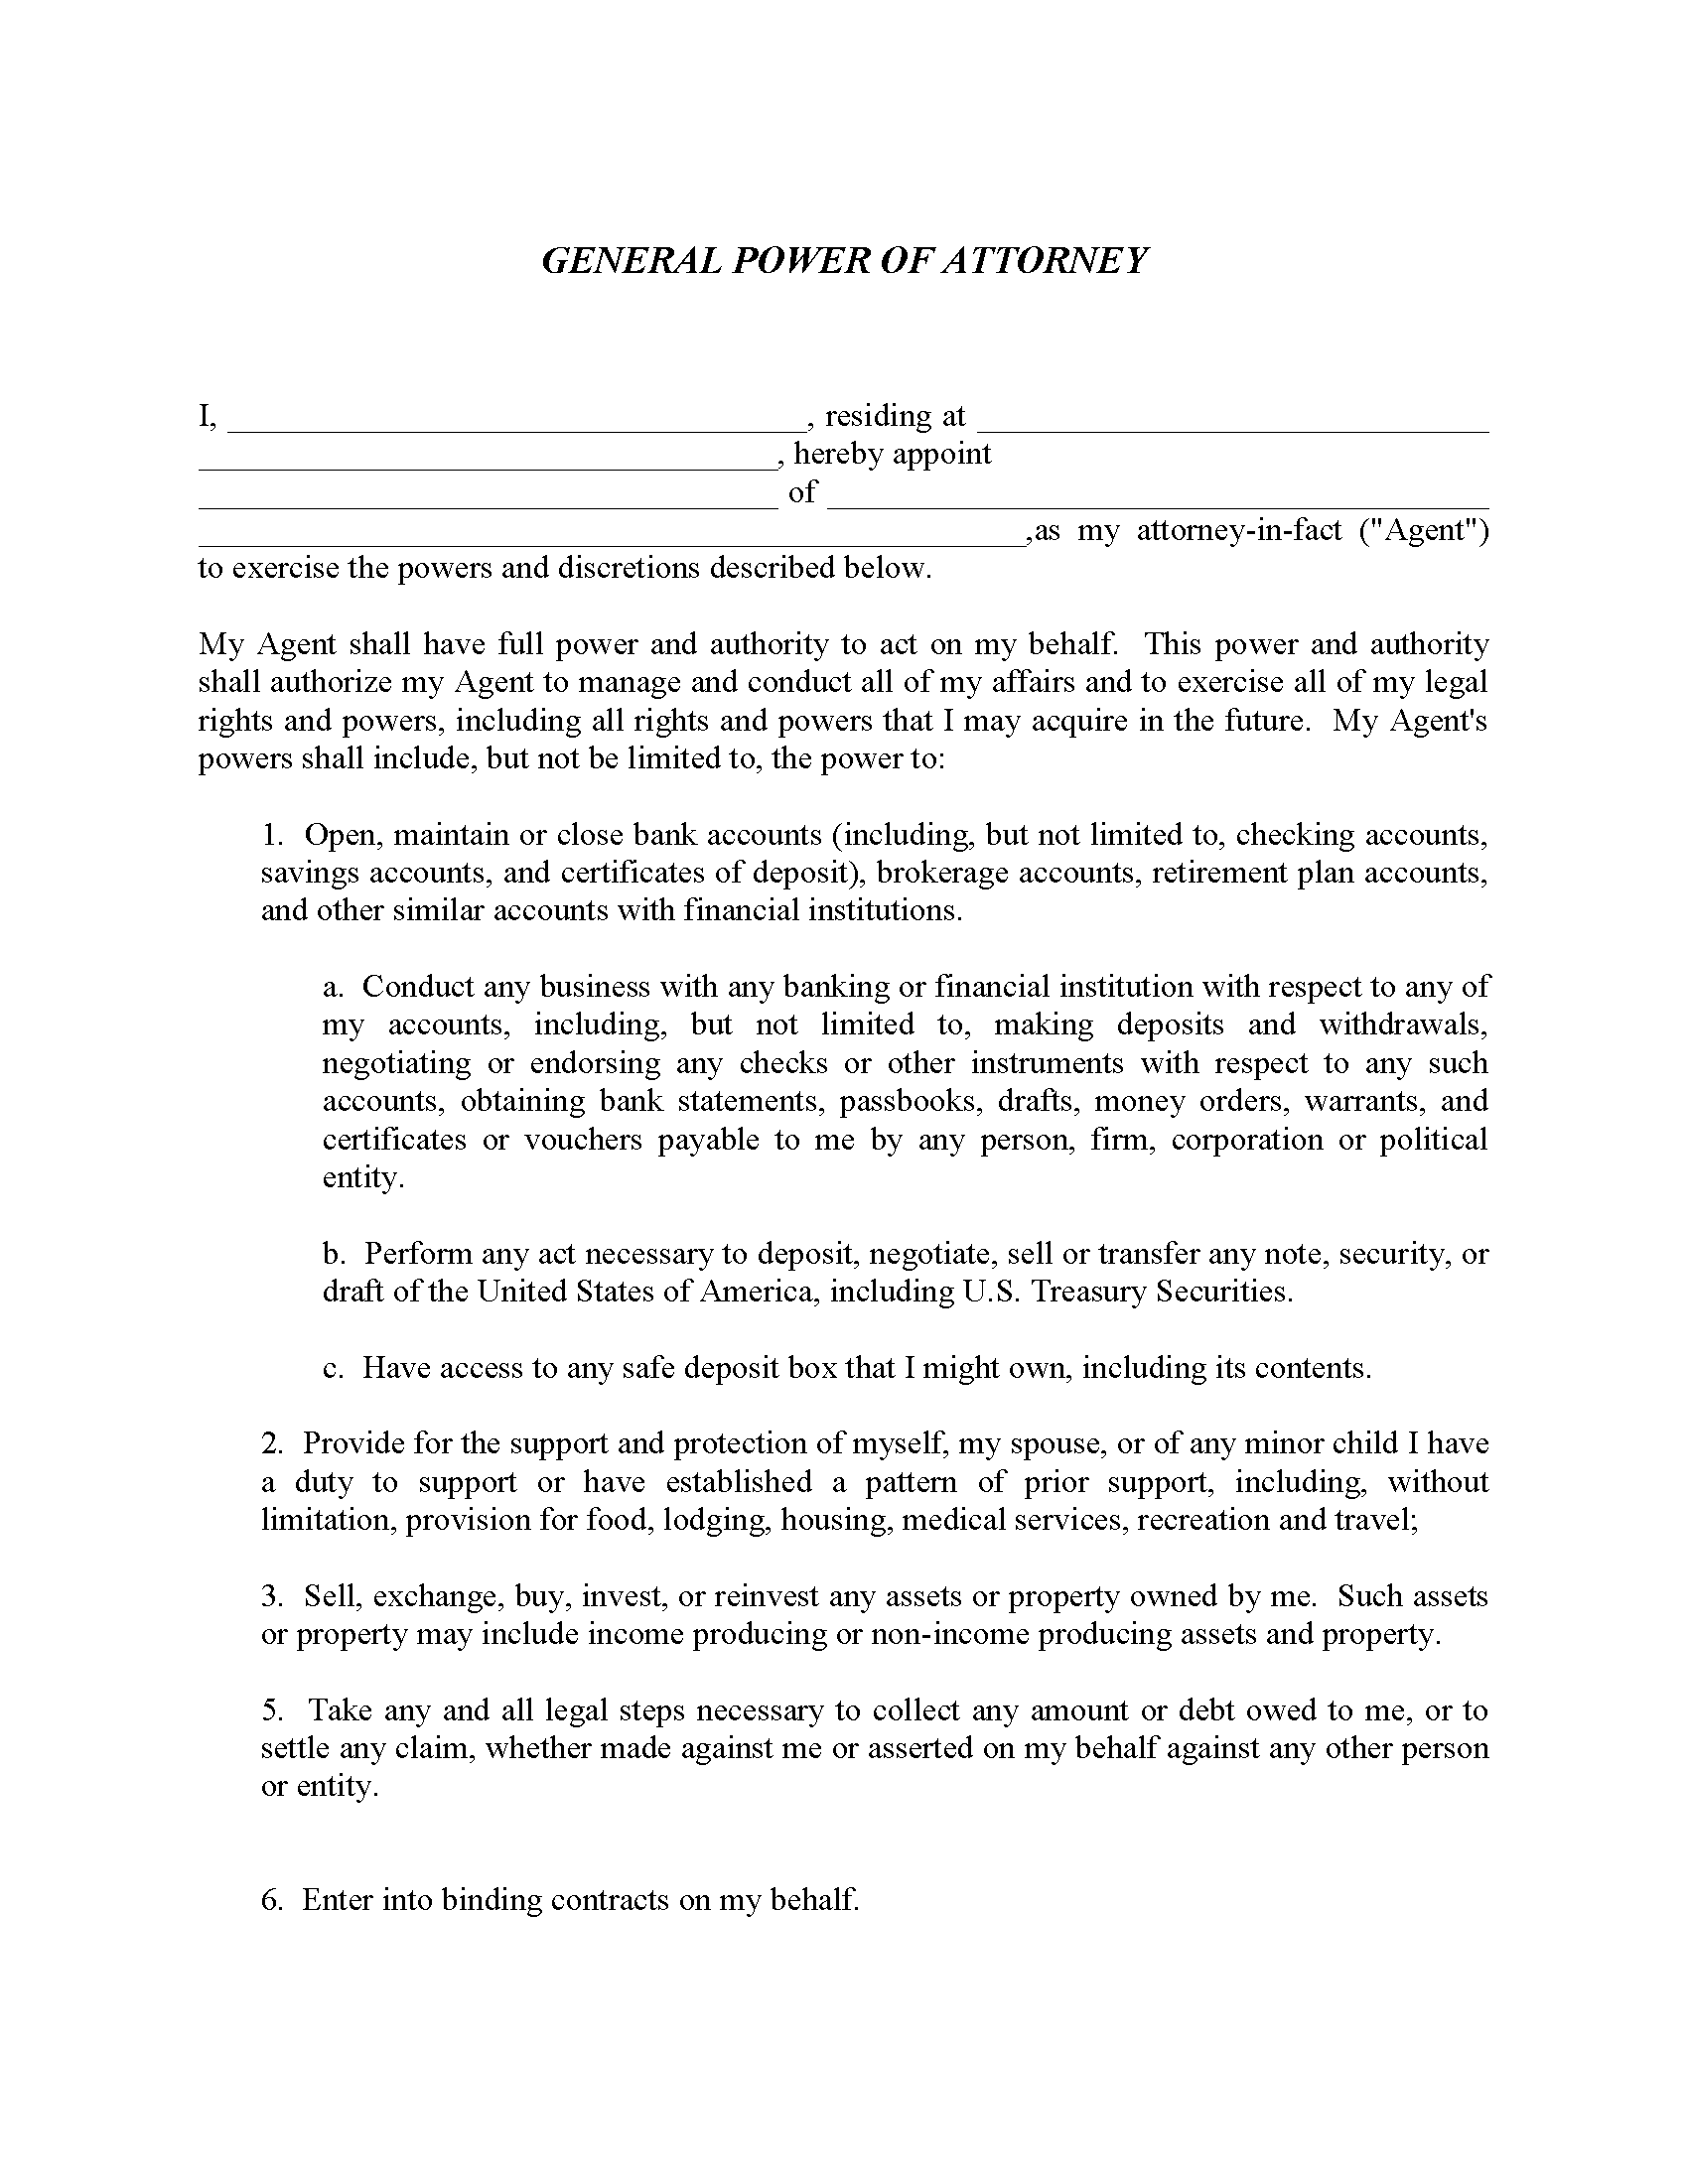 power of attorney free download